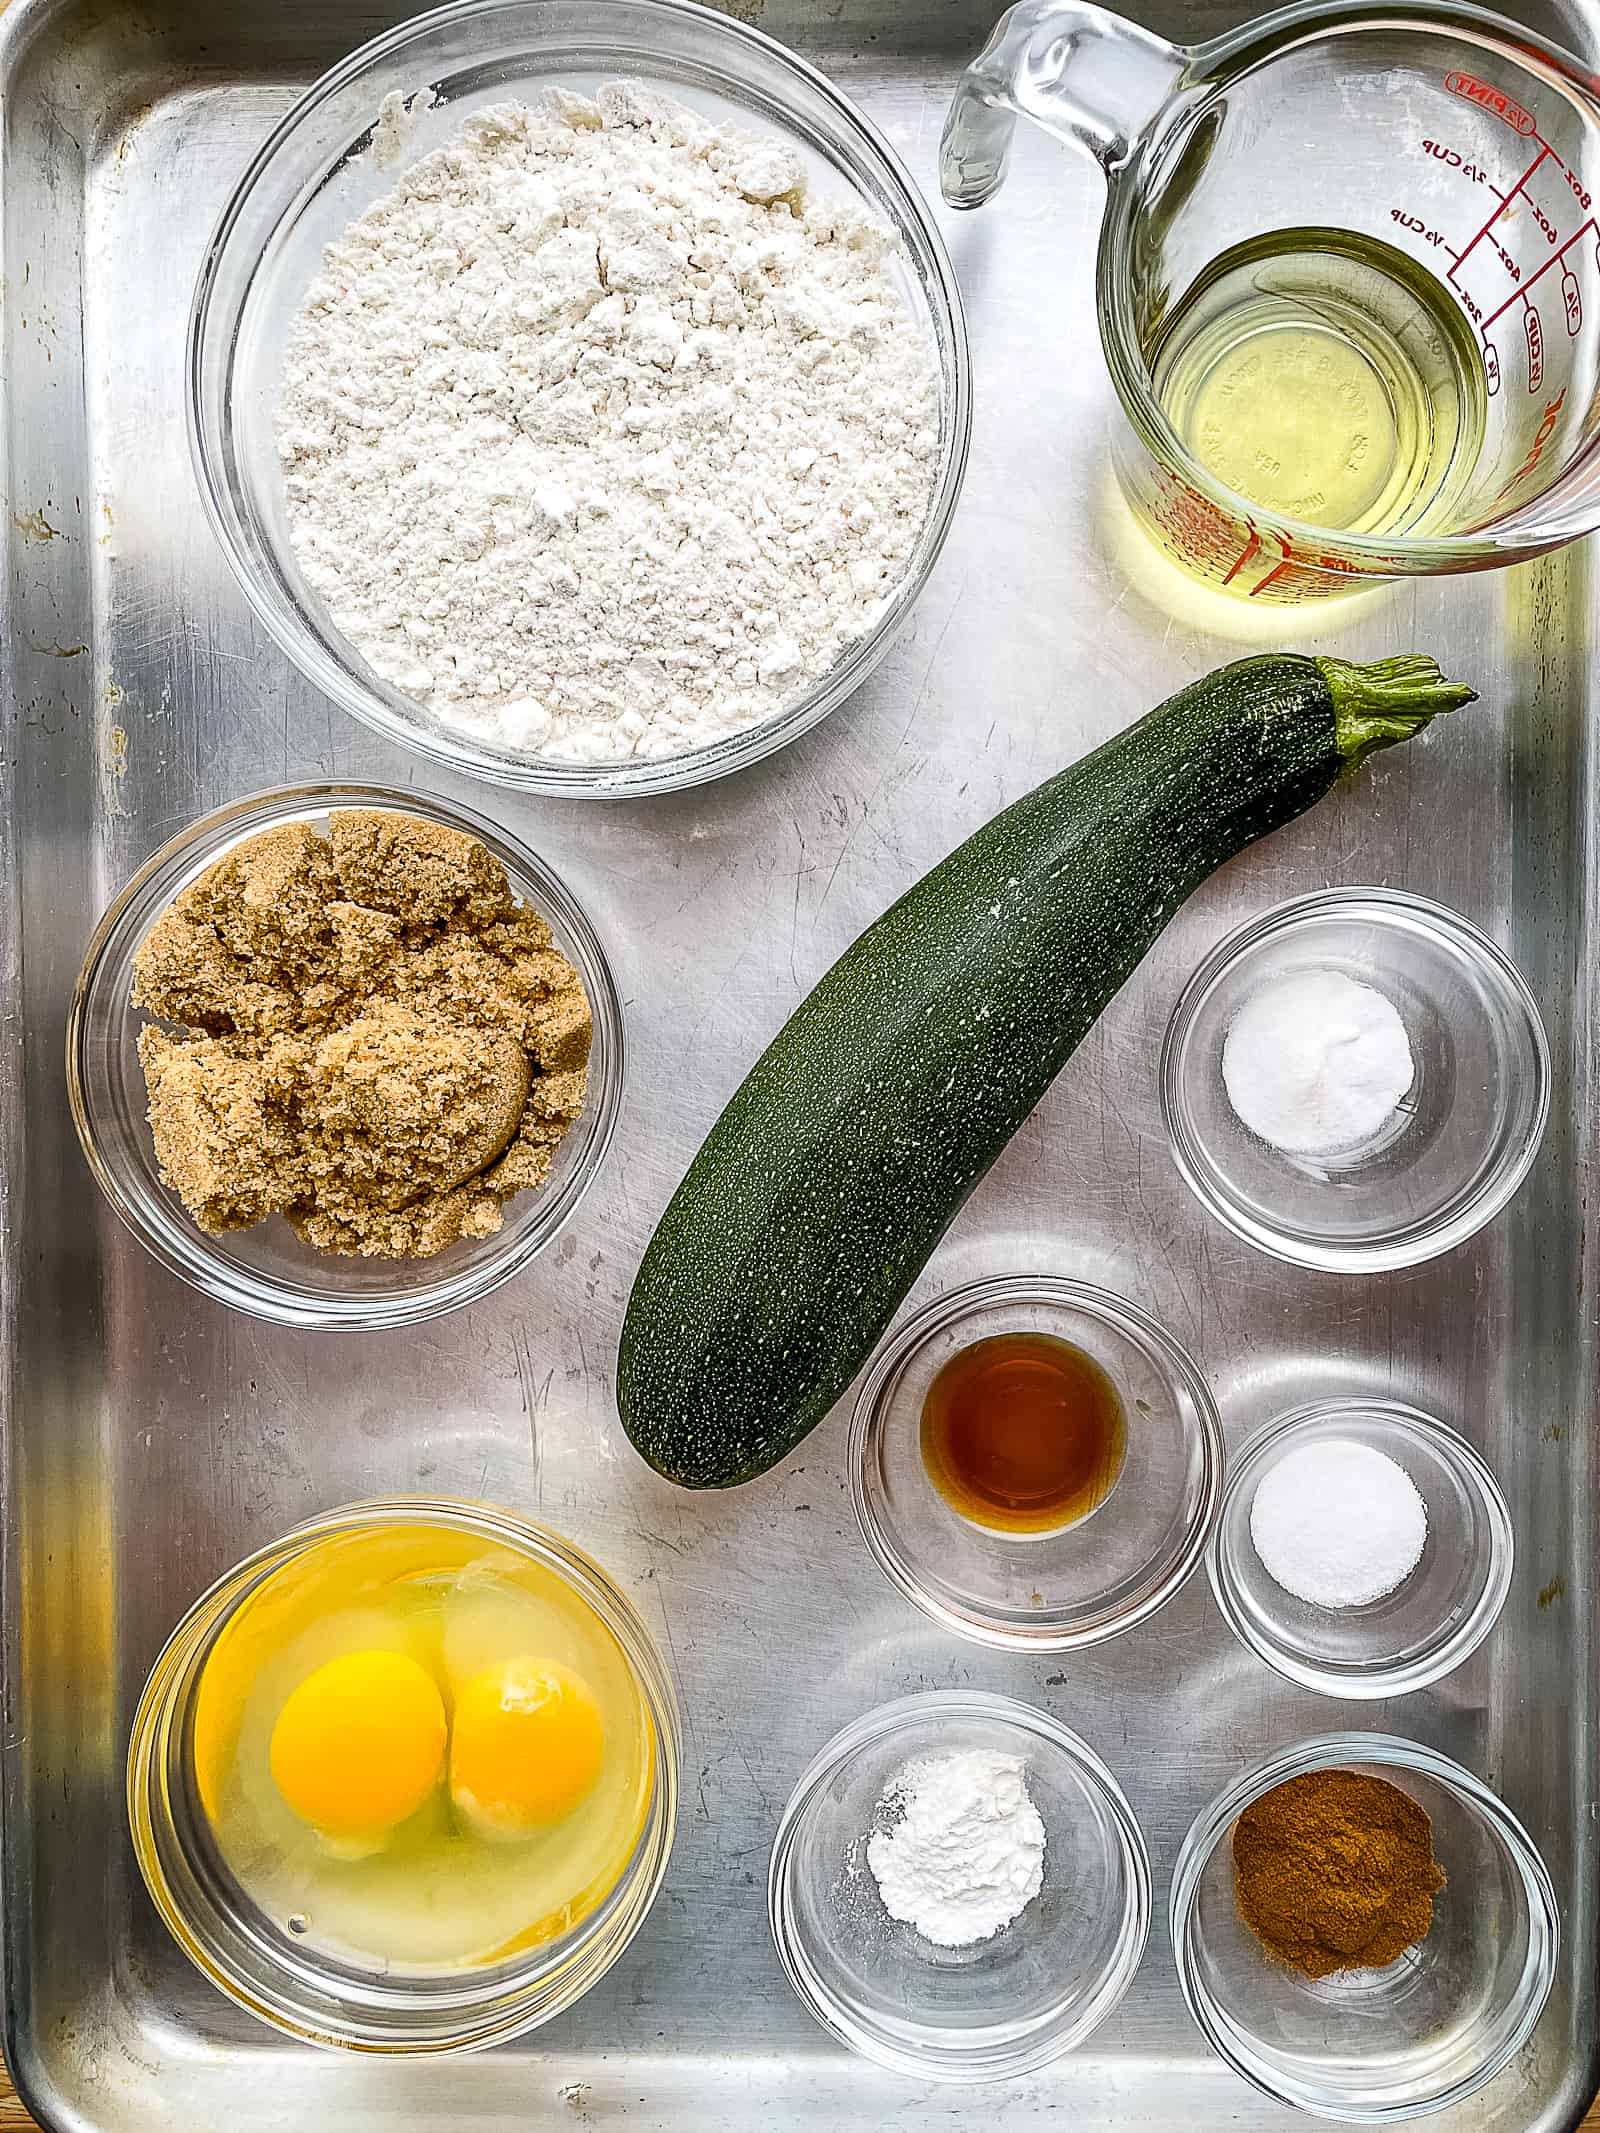 Ingredients for gluten-free zucchini bread in individual bowls.